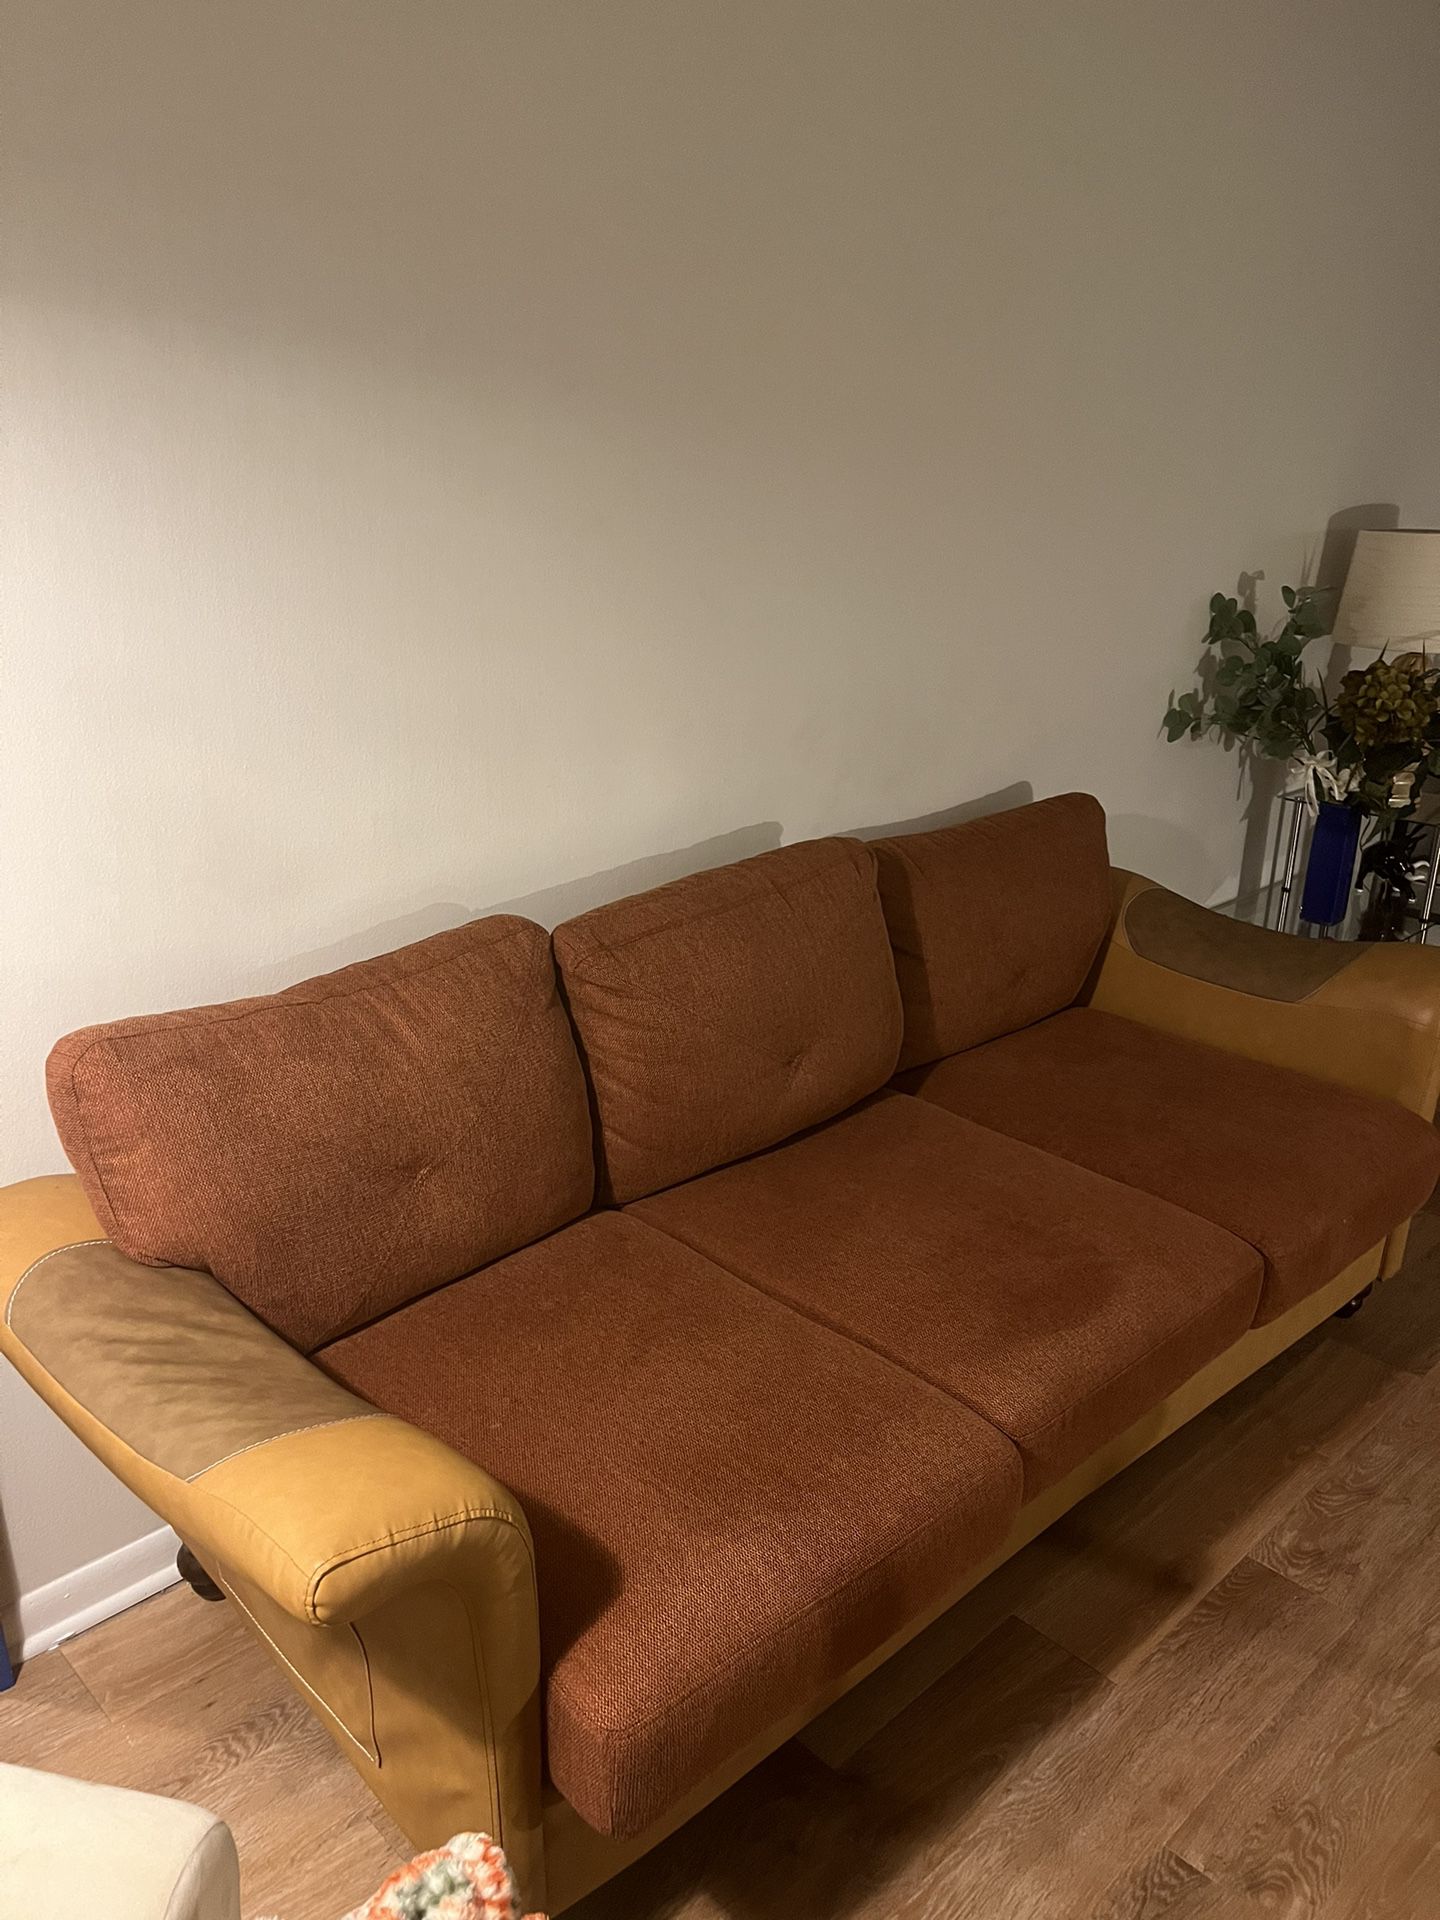 New Brown/red/orange Mid Century Modern Sofa. Need Gone By 1/22!